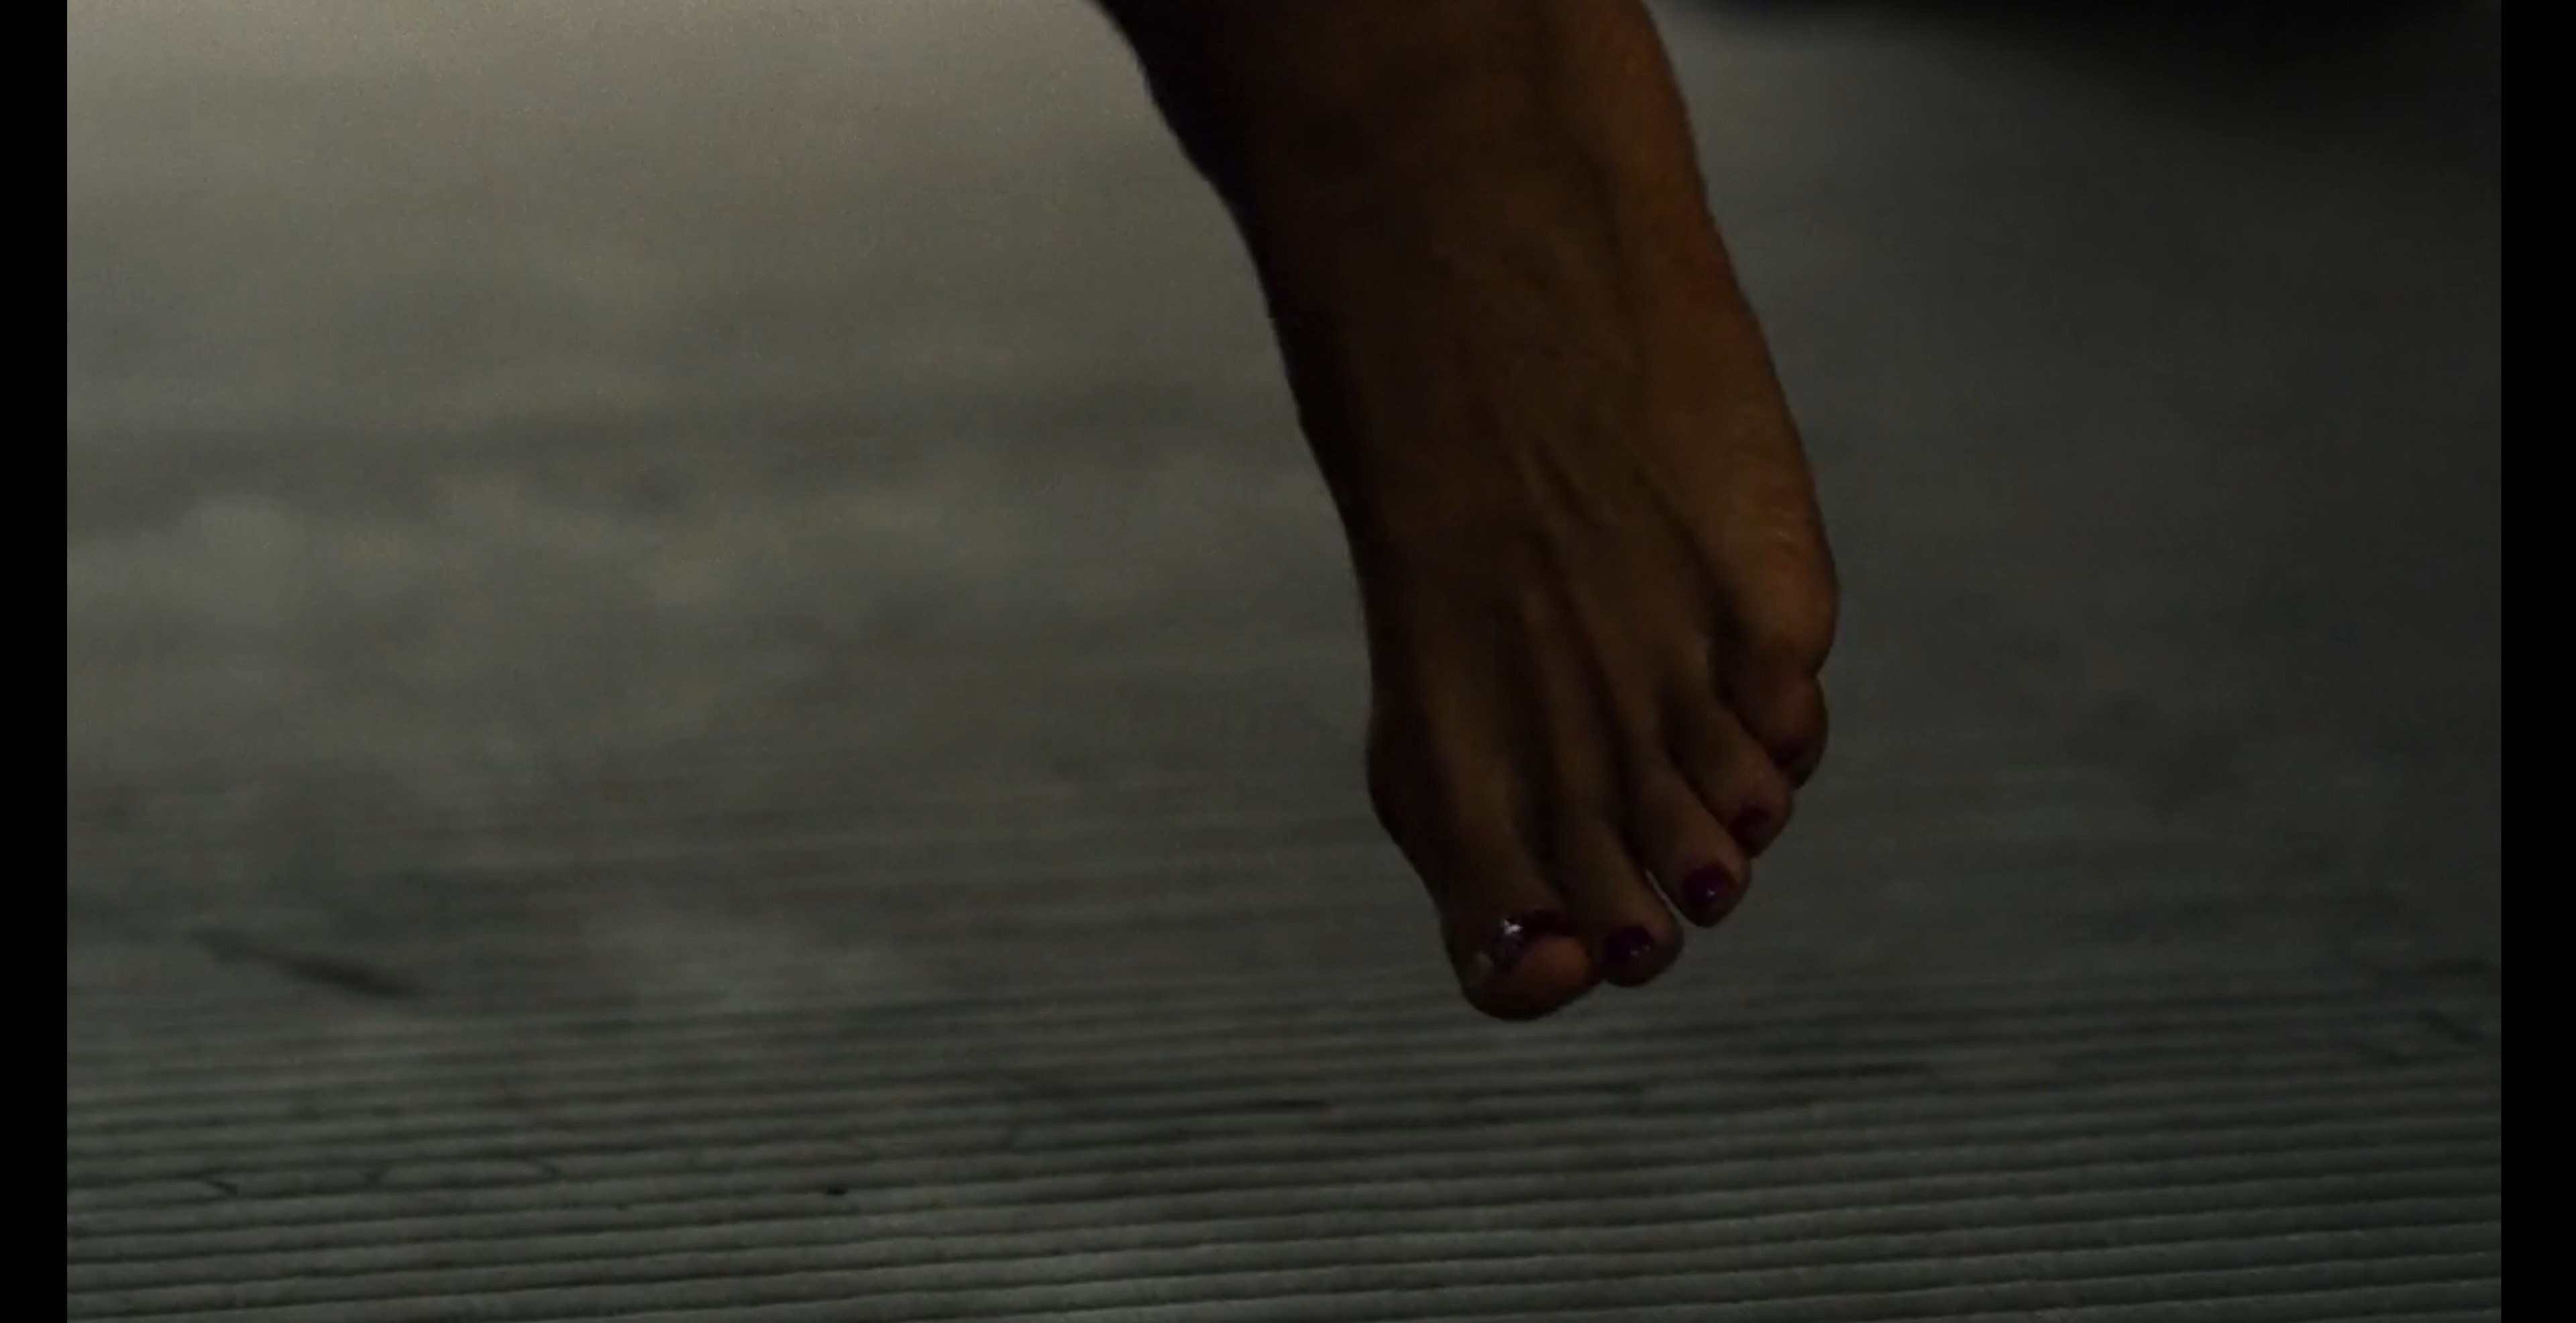 People who liked Rosario Dawson's feet, also liked.